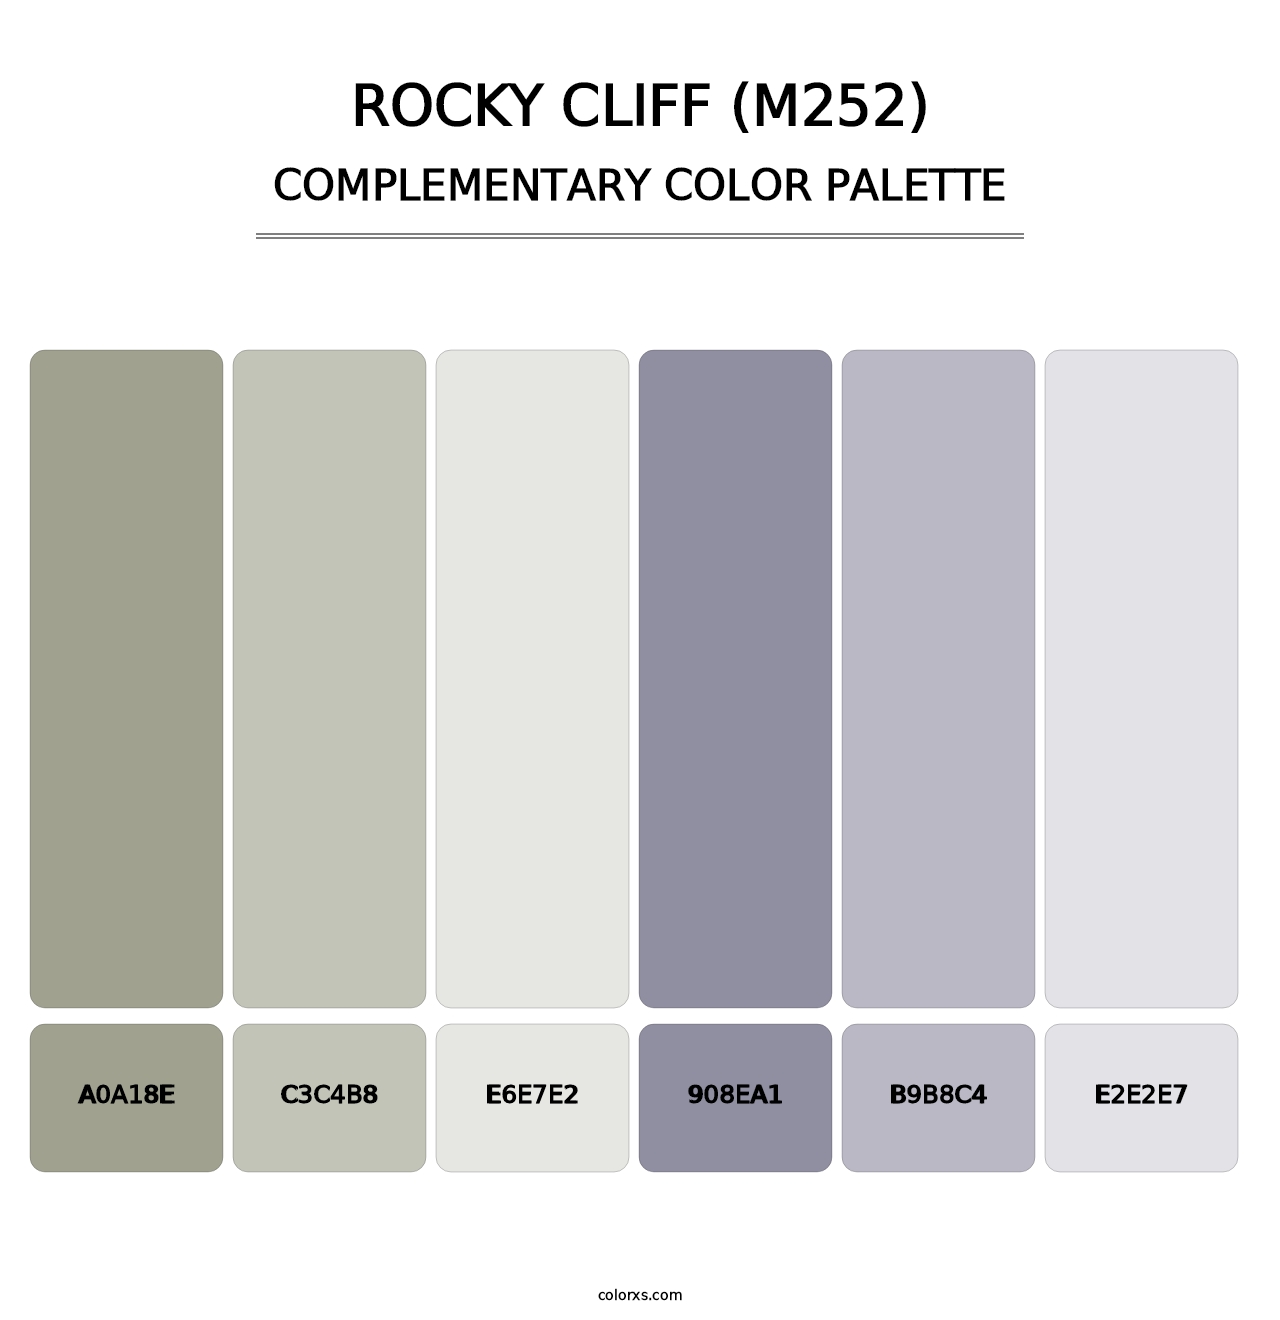 Rocky Cliff (M252) - Complementary Color Palette